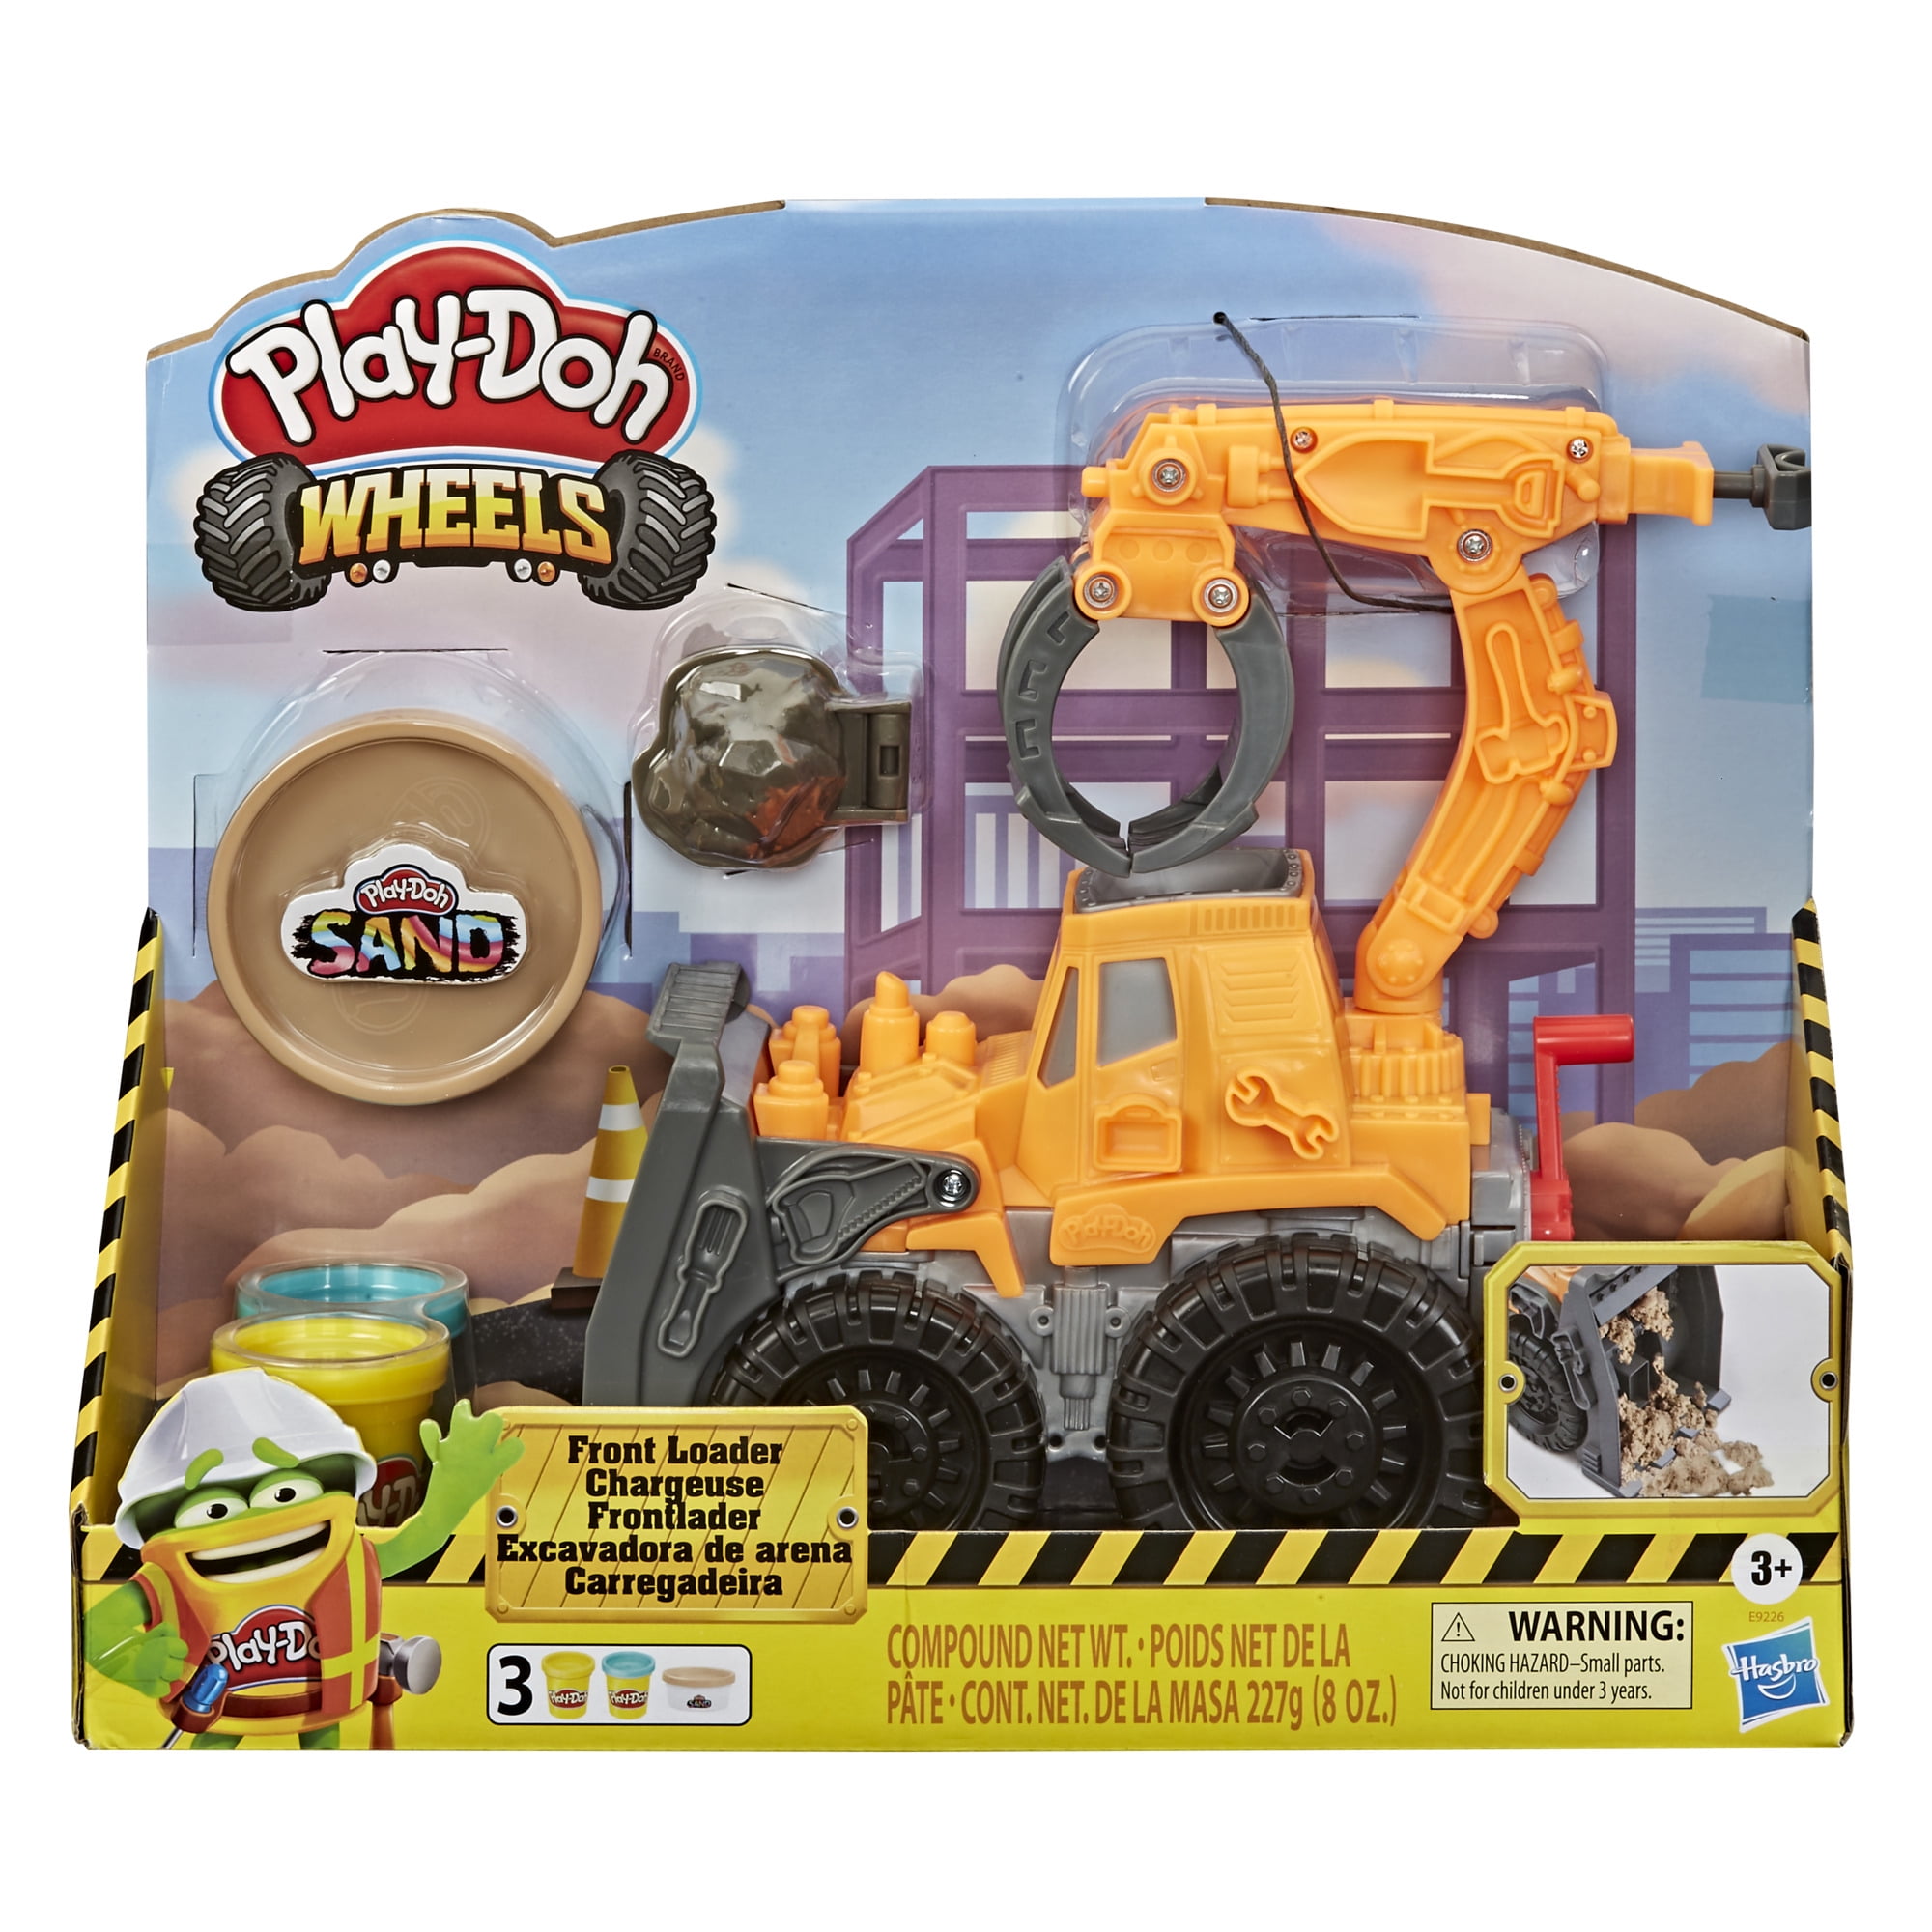 Play-Doh Wheels Pavement and Cement Dough 2-pack 16oz for sale online 